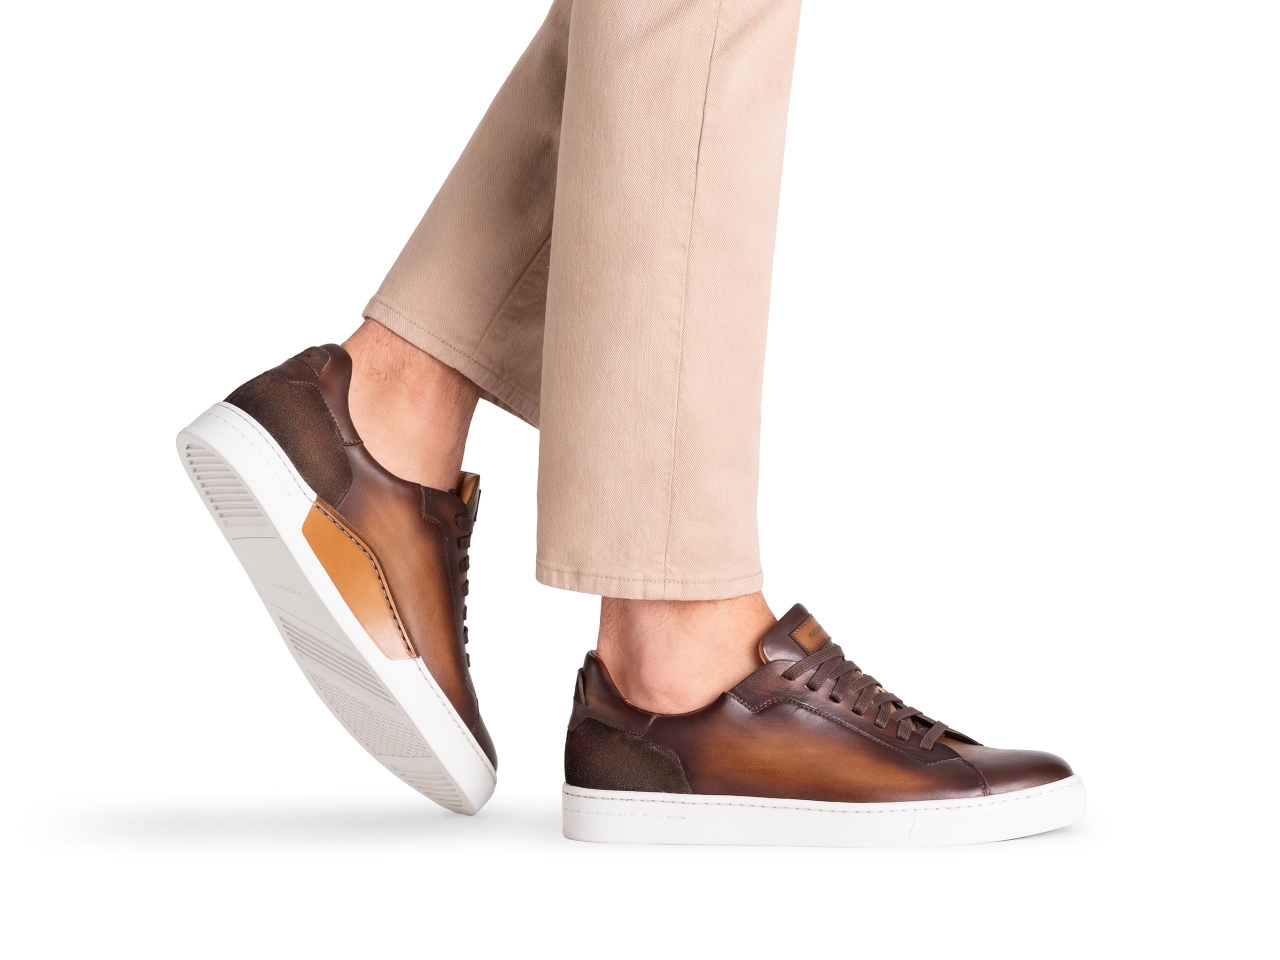 The Amadeo Brown pairs well with khaki pants